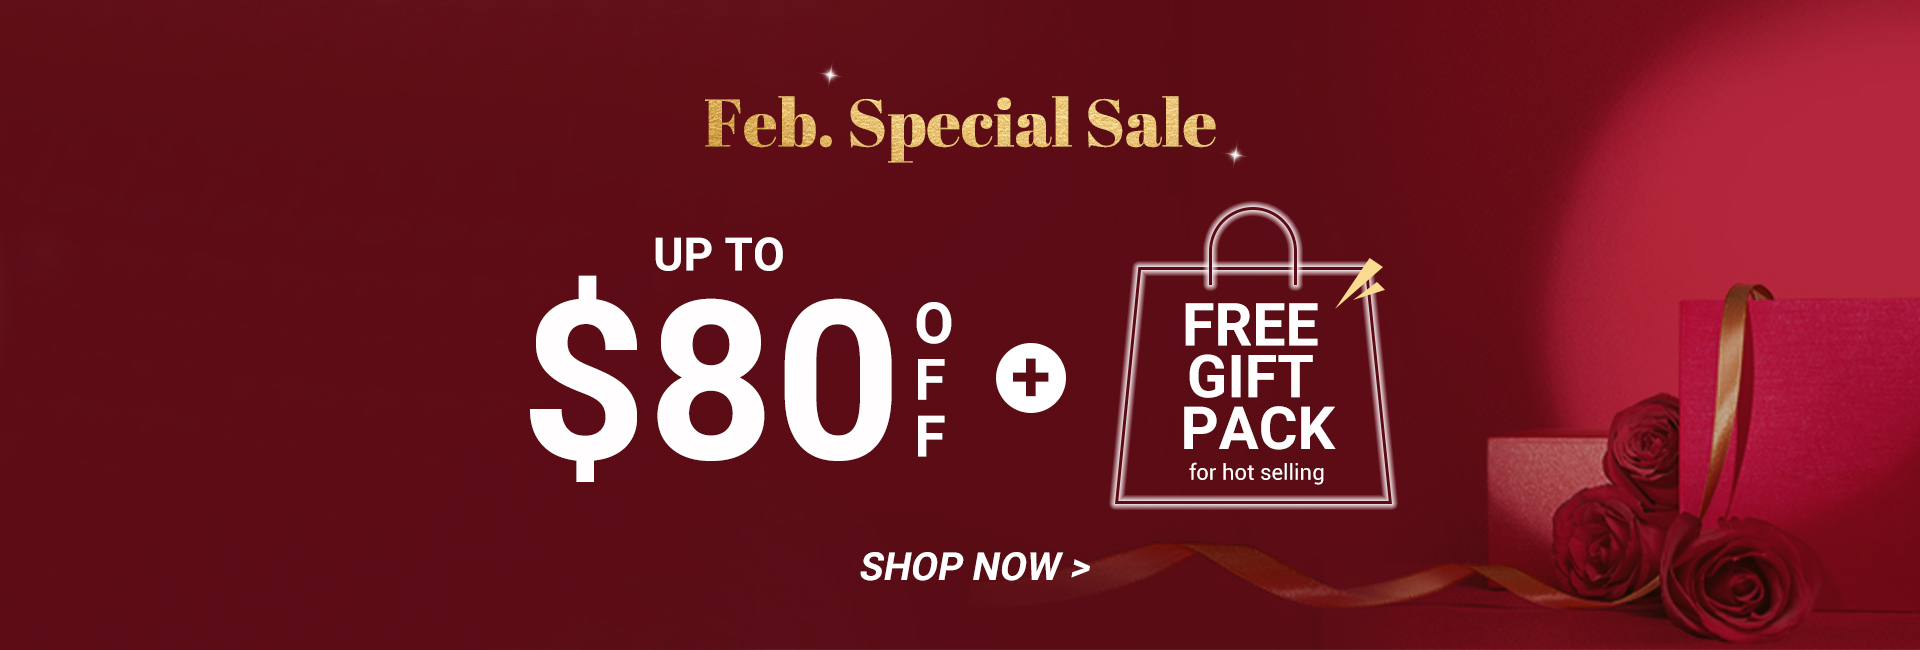 Feb. Special Sale